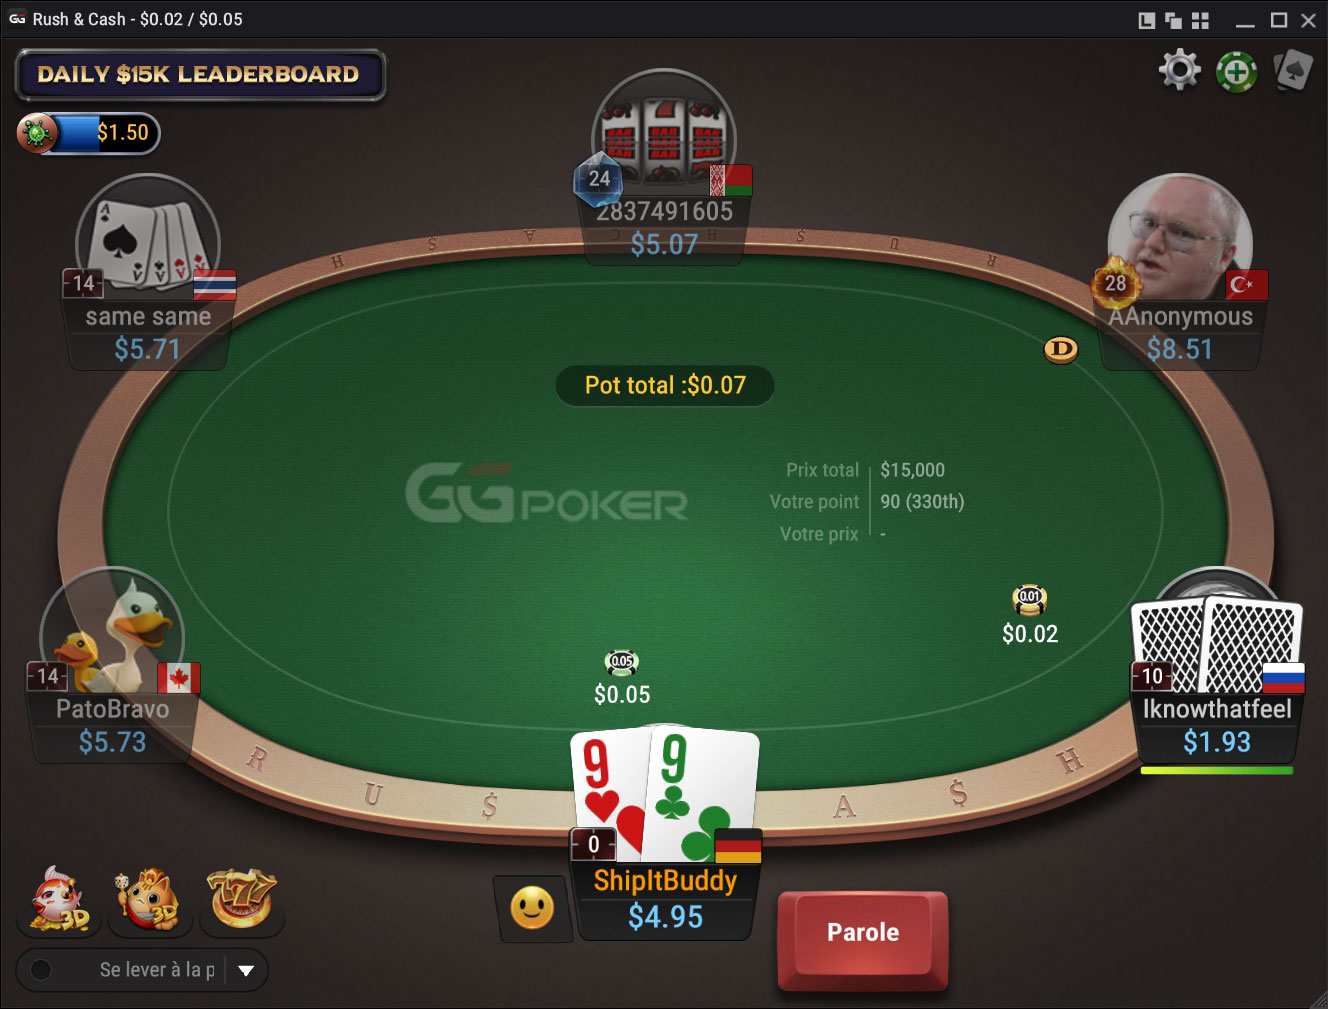 GGPoker’s High Rollers Week Starts Today, $22 Million Guaranteed